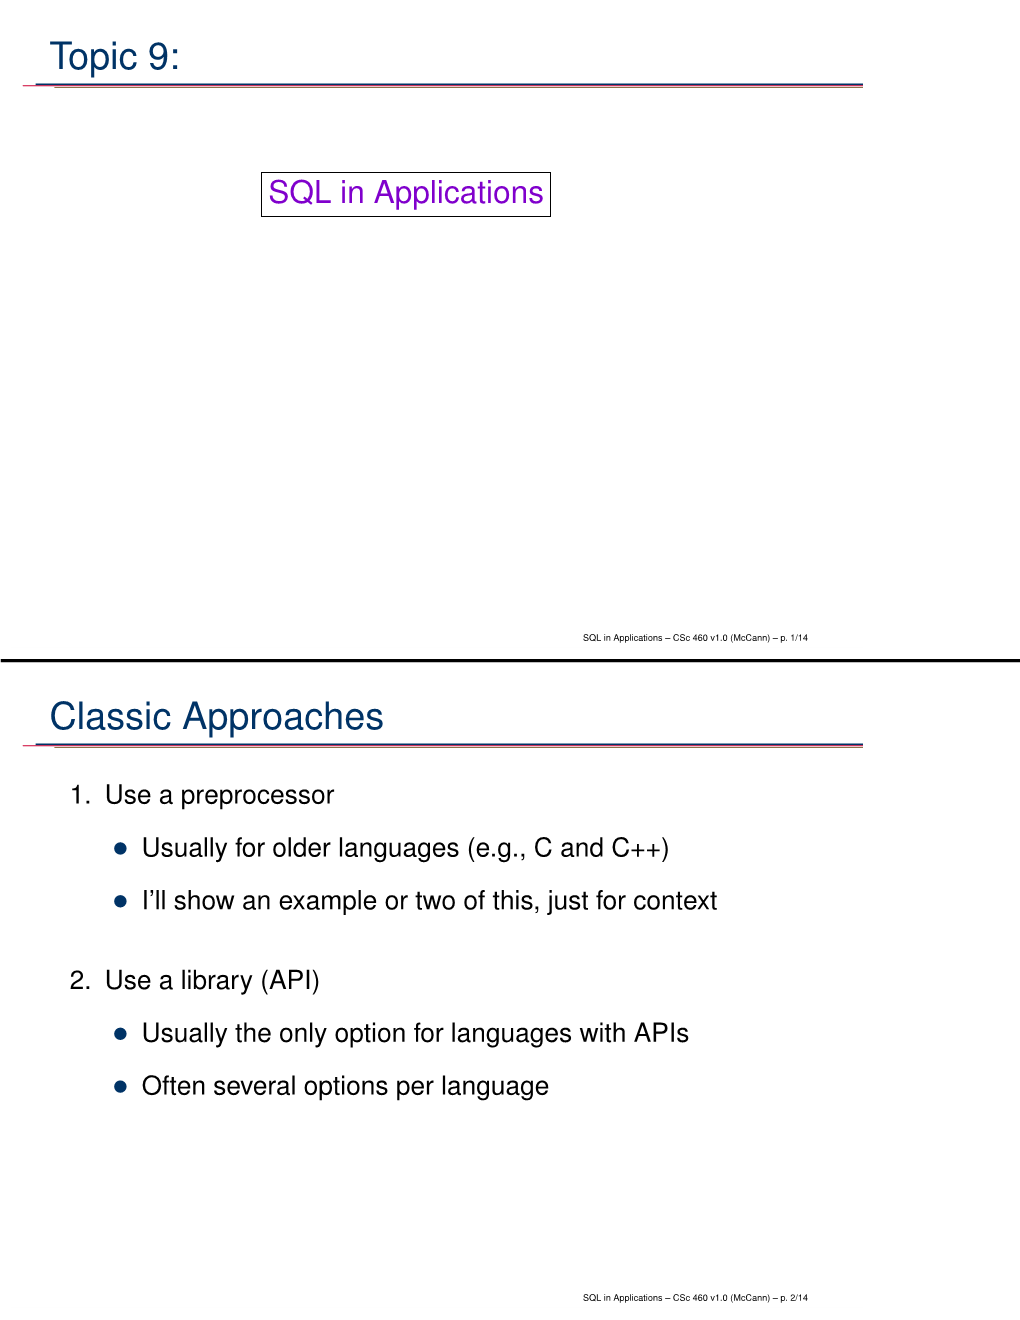 Topic 9: Classic Approaches